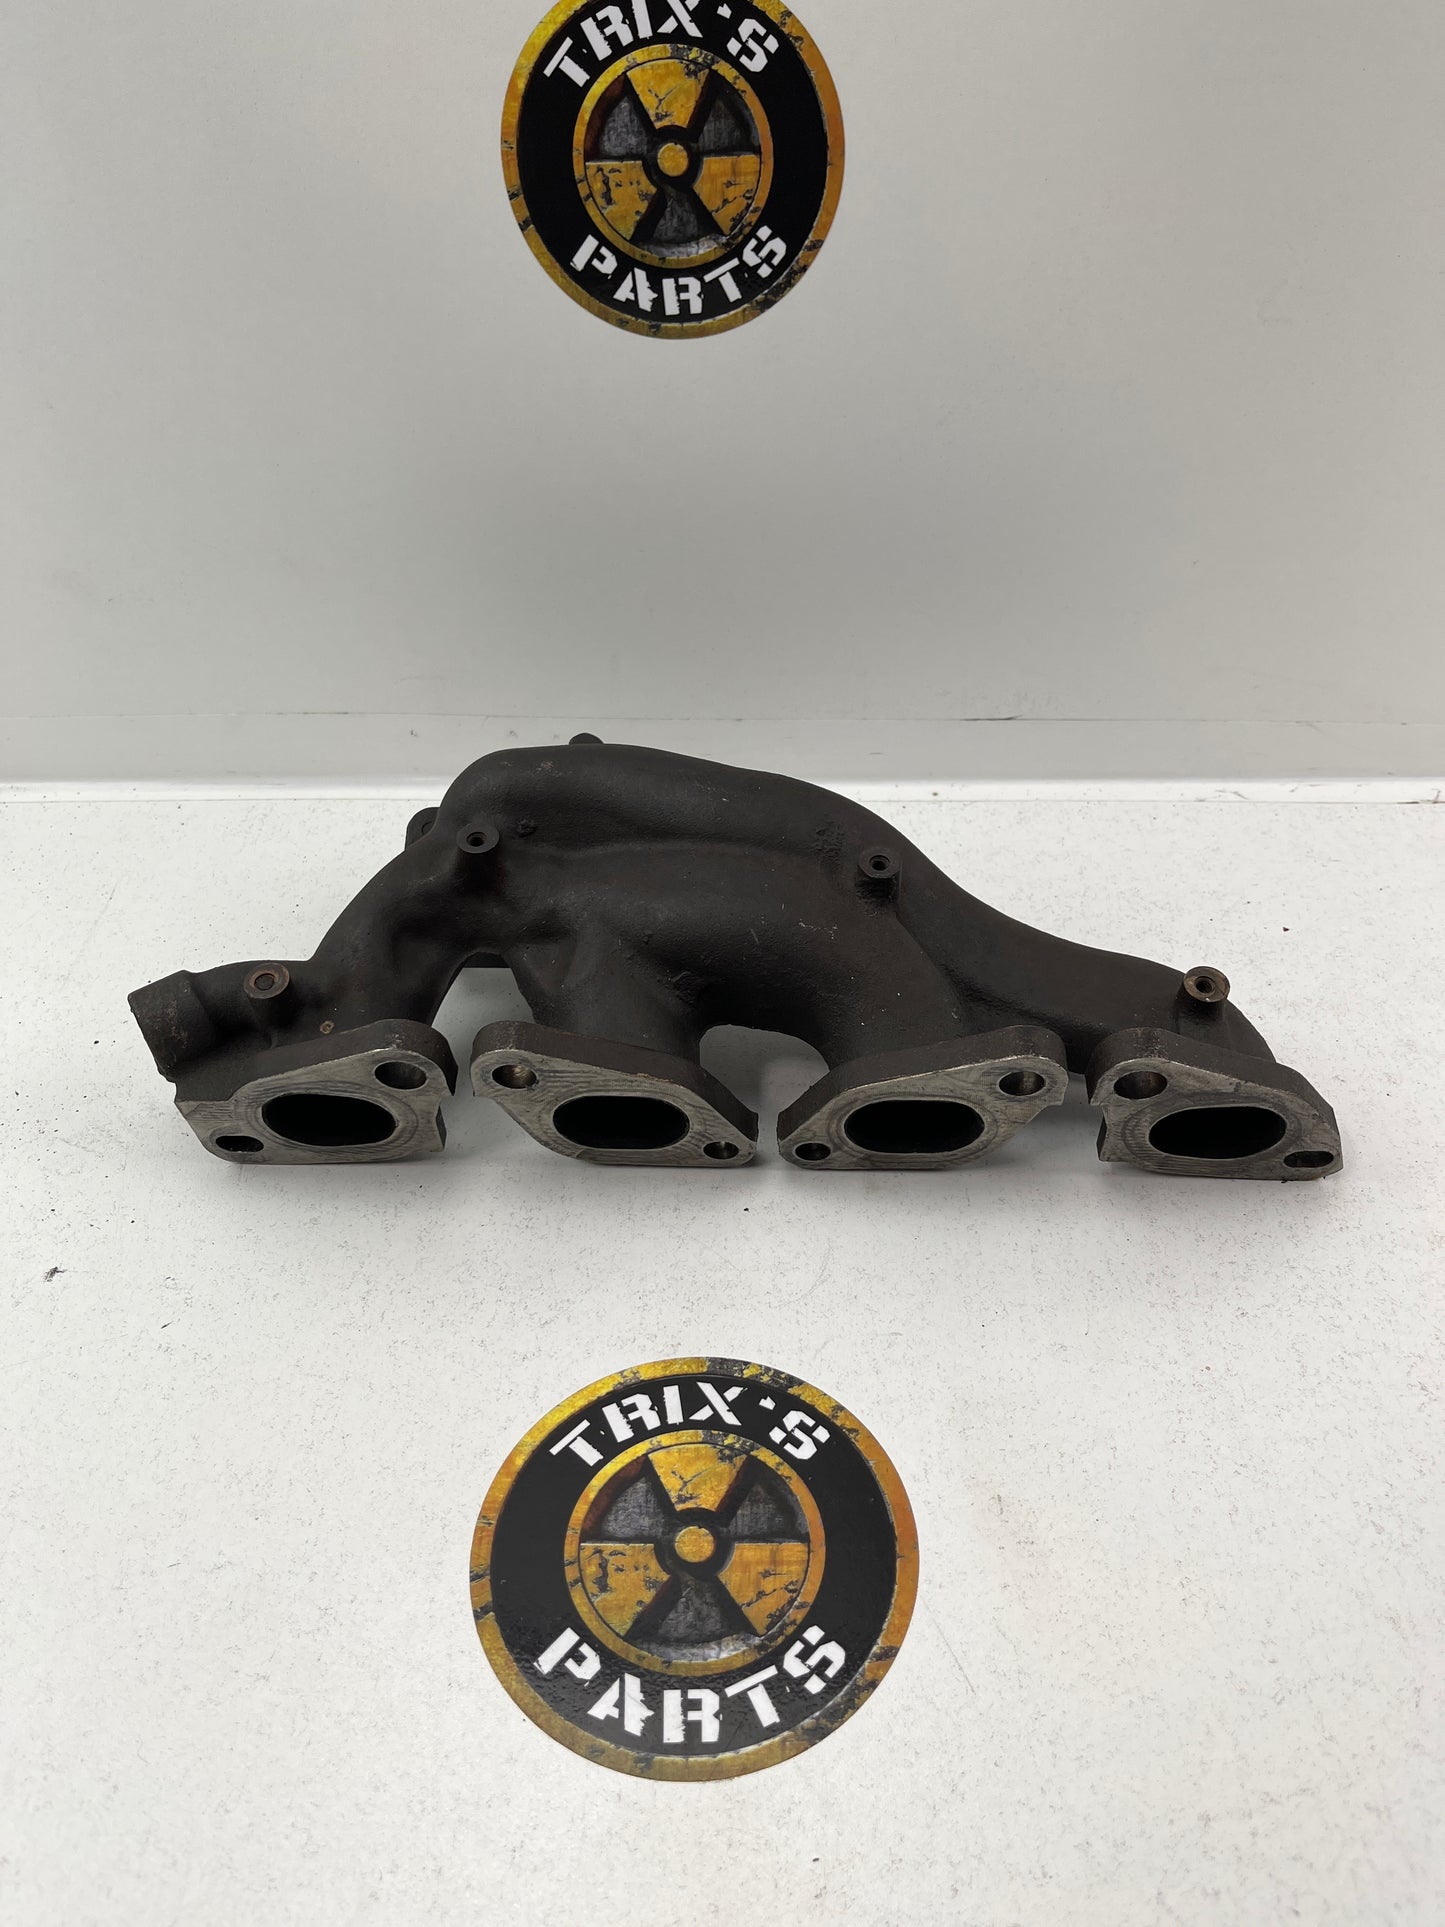 Used Good Condition Exhaust Manifold to Suit S15 Silvia SR20DET Engine